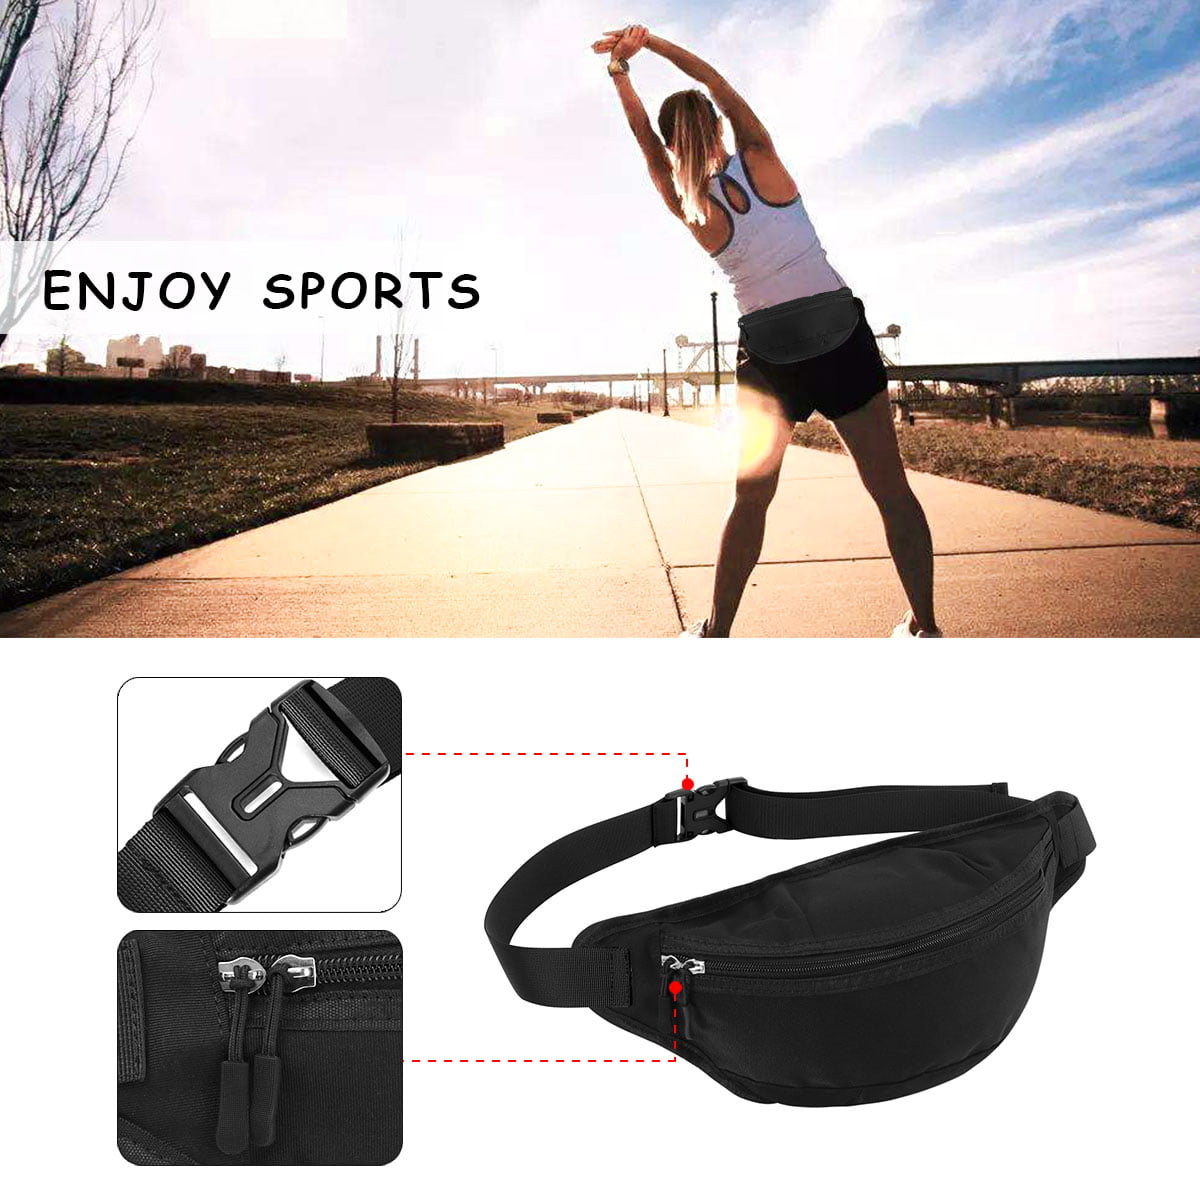 TIFRY Fanny Pack for Men Women Waist Pack Bag Quick Release Buckle Water Resistant 